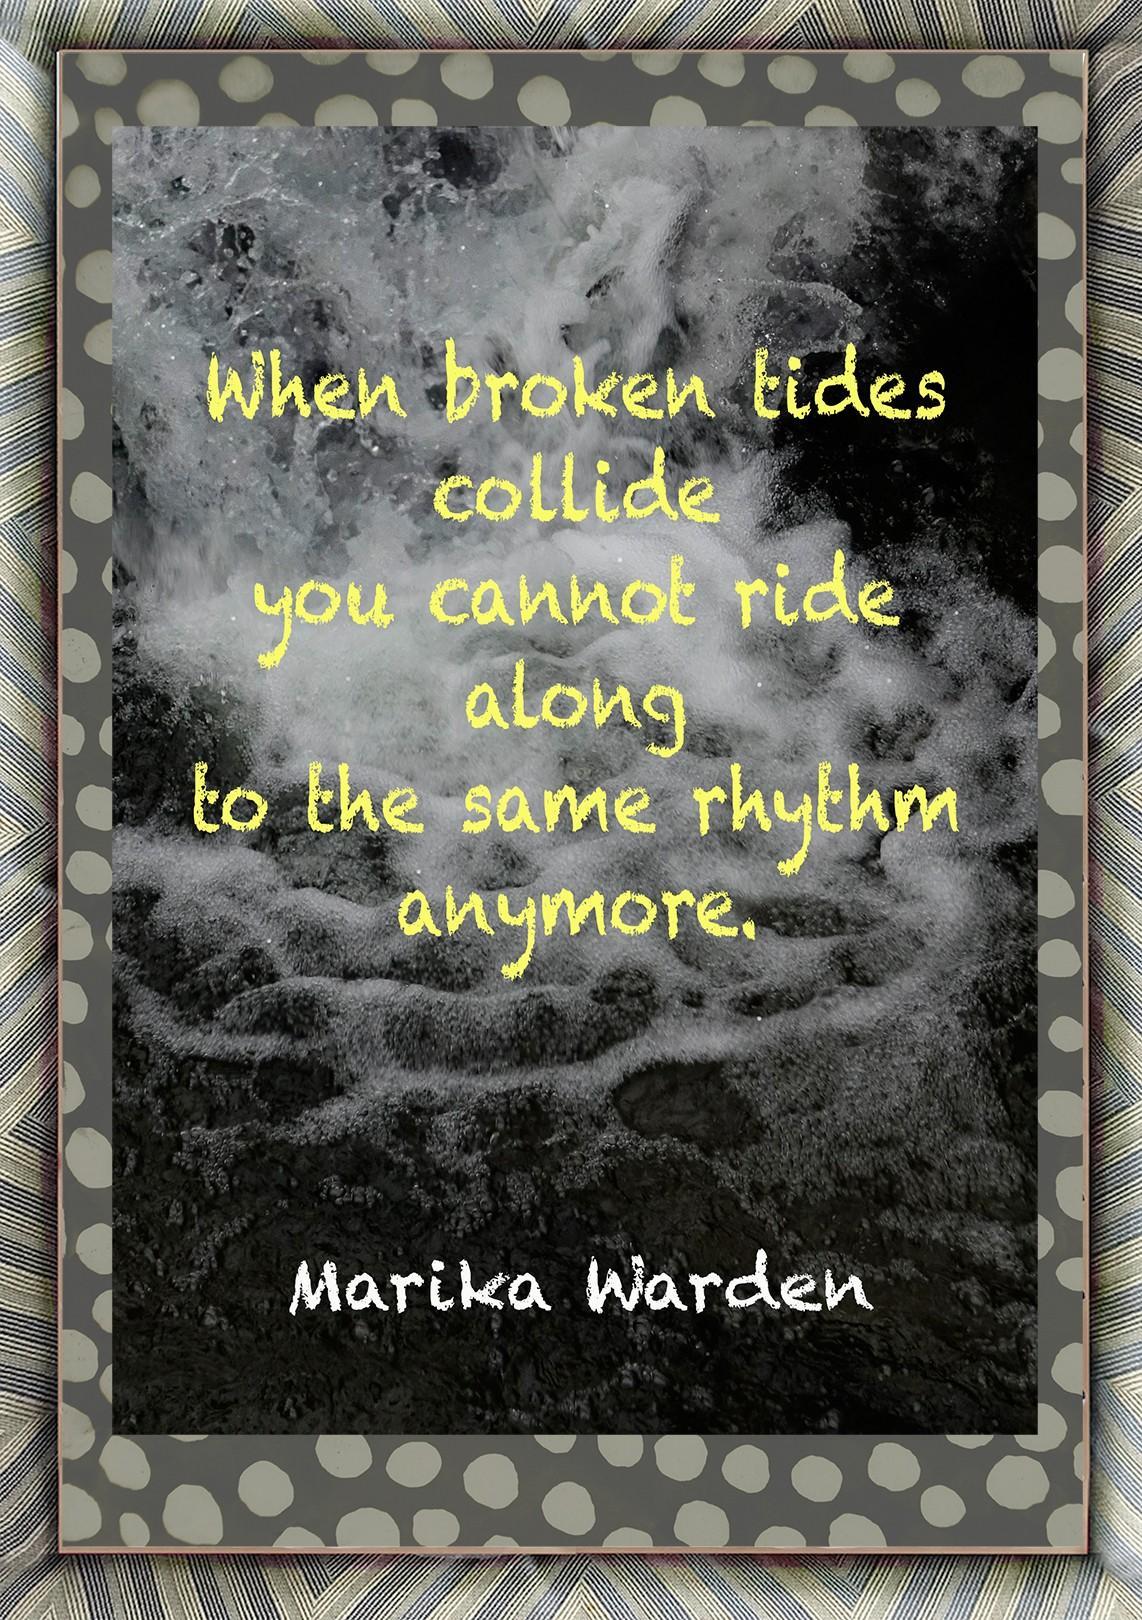 Robin Botie of Ithaca, New York, photoshops words of her daughter Marika Warden who died of leukemia.